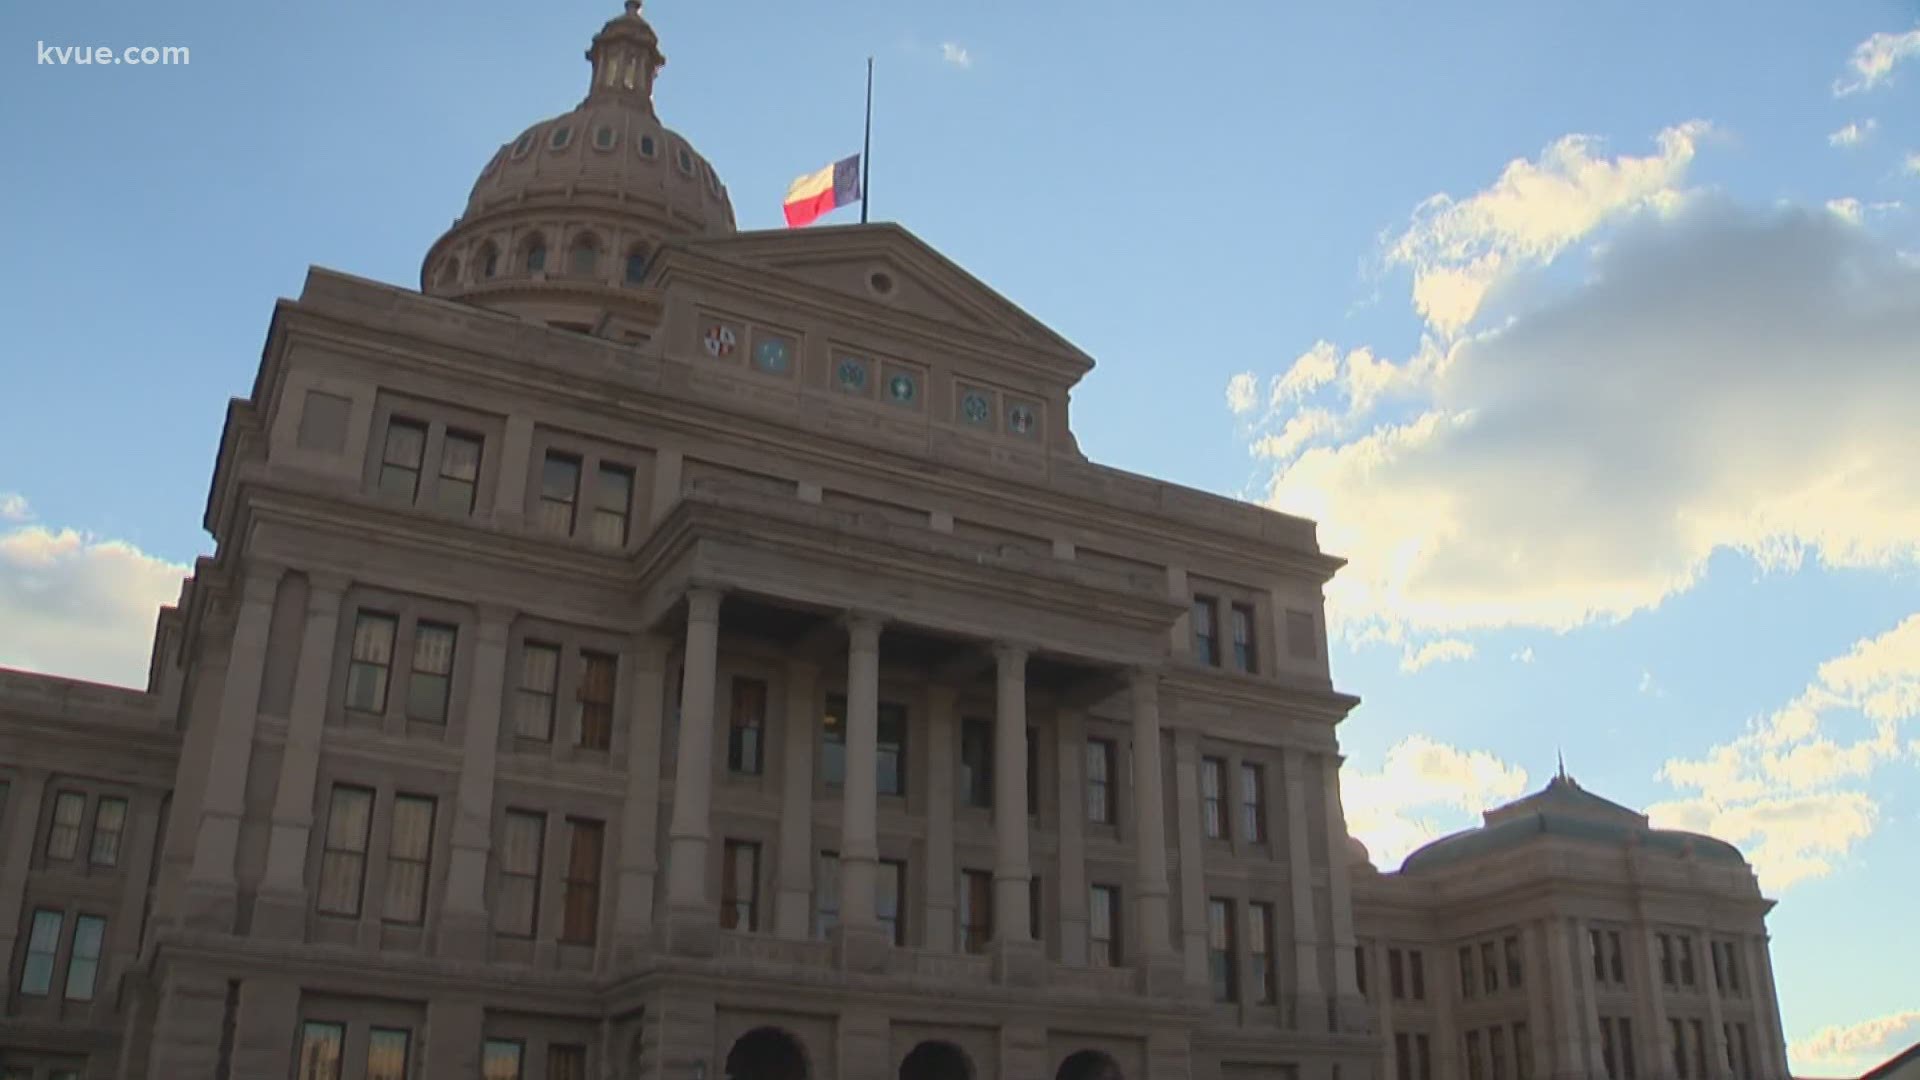 Texas lawmakers will head back to work Tuesday as the 87th Texas Legislature convenes. KVUE's Luis de Leon tells us what to expect.